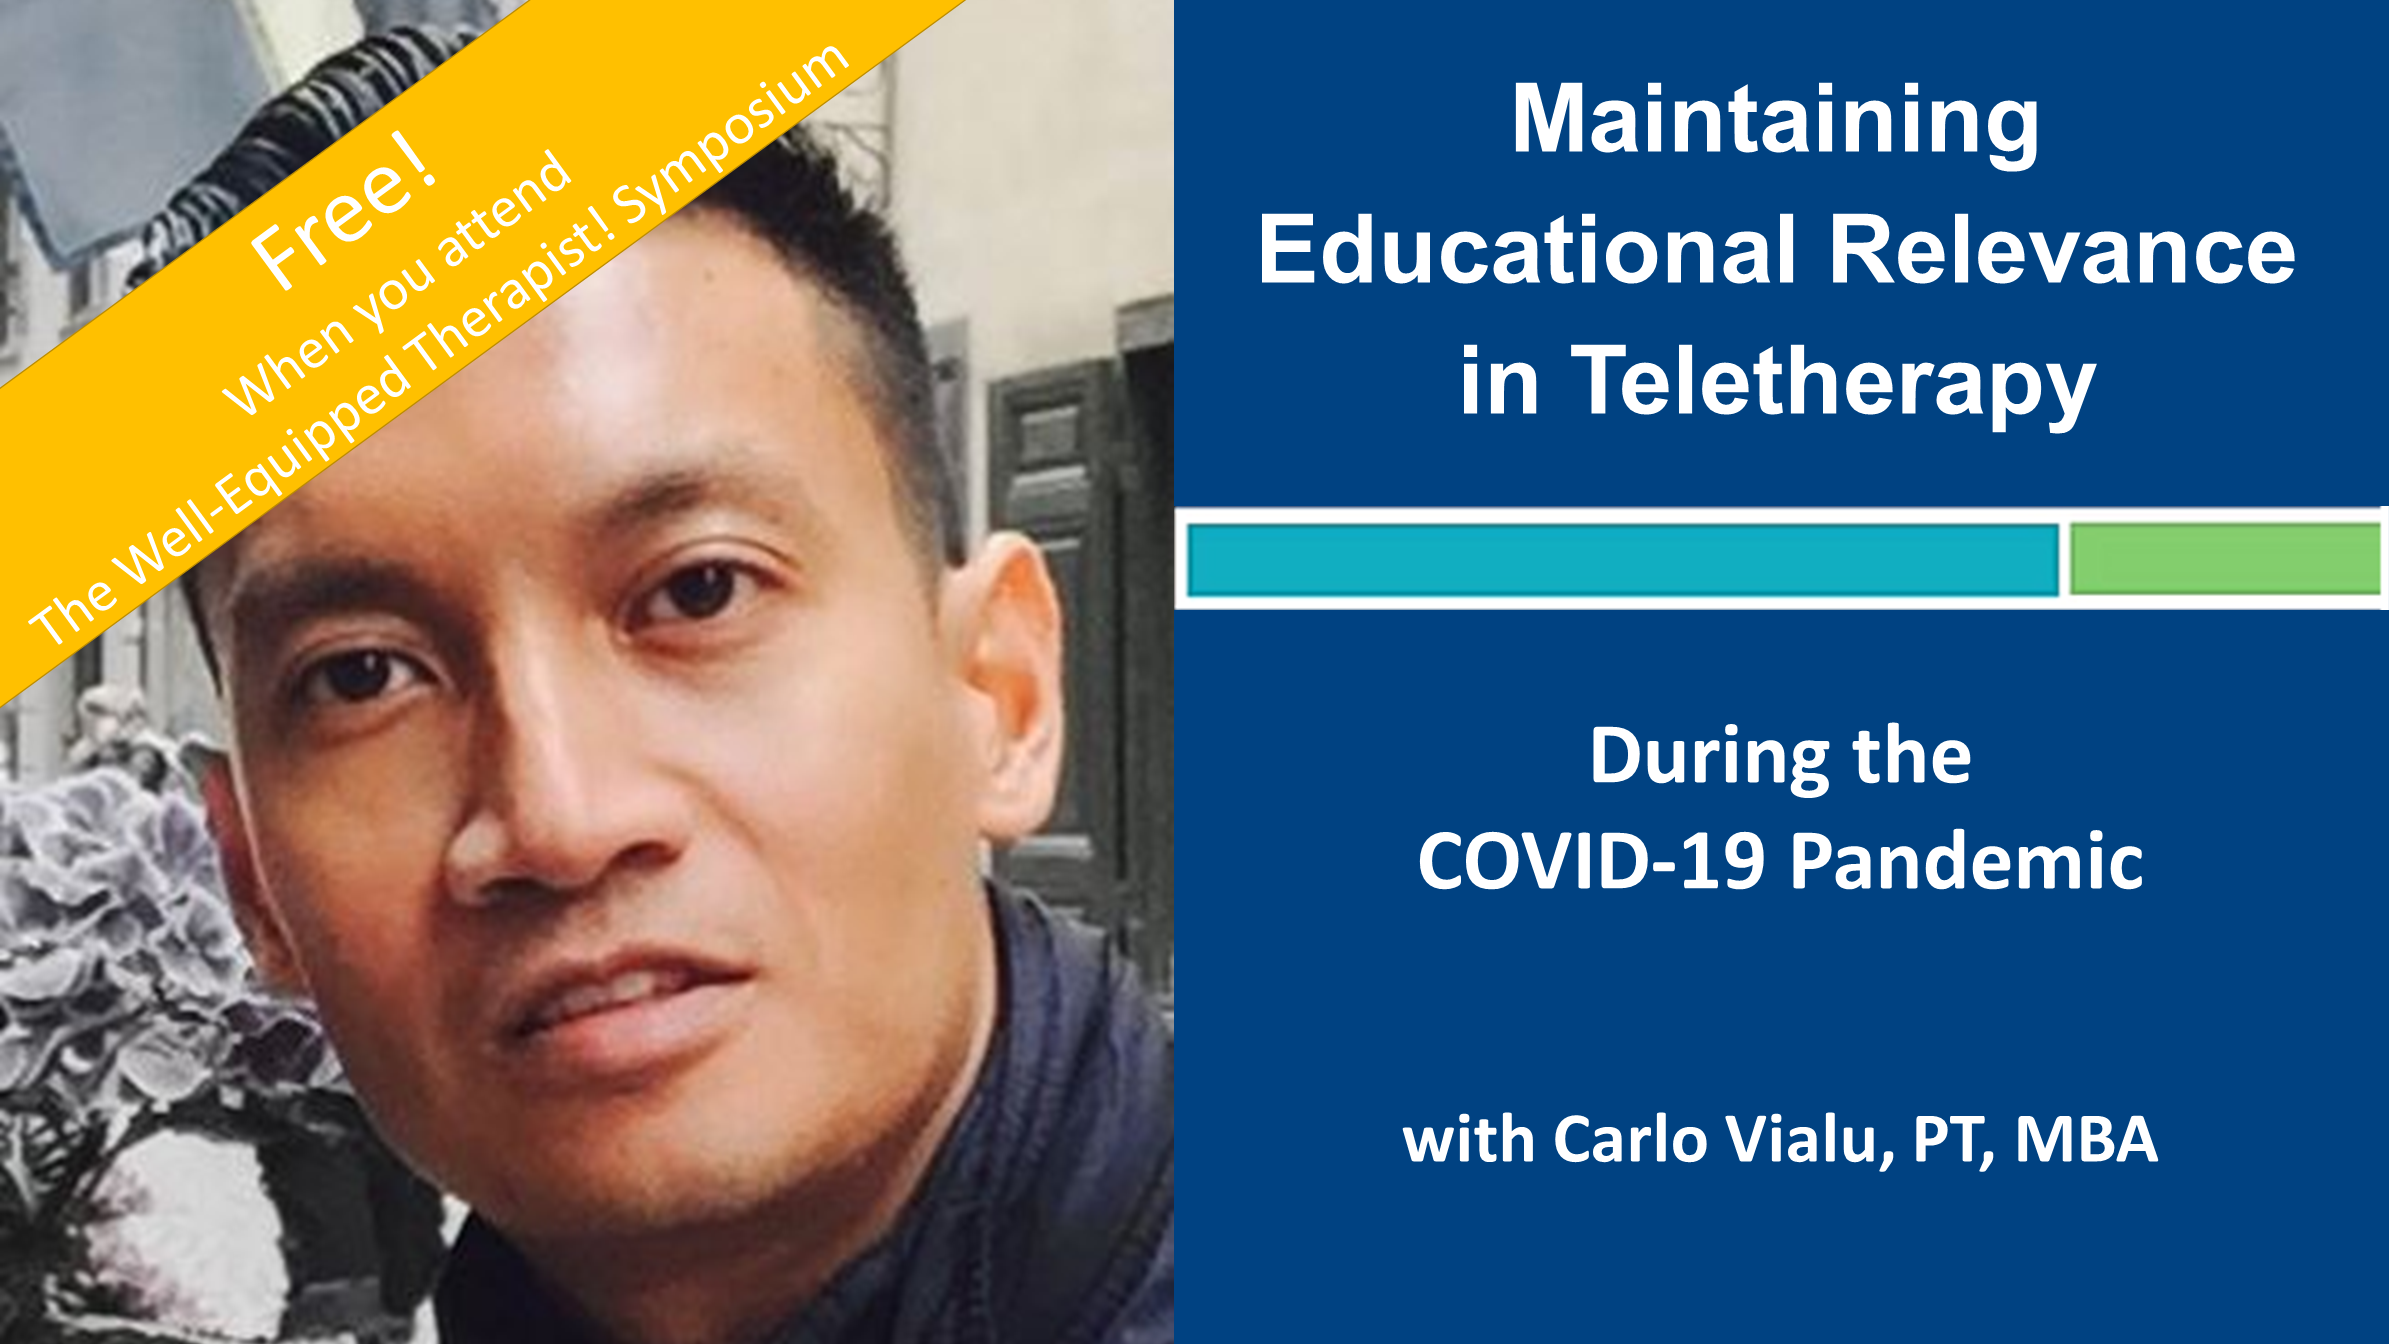 Maintaining Education Relevance in Teletherapy During the COVID-19 Pandemic